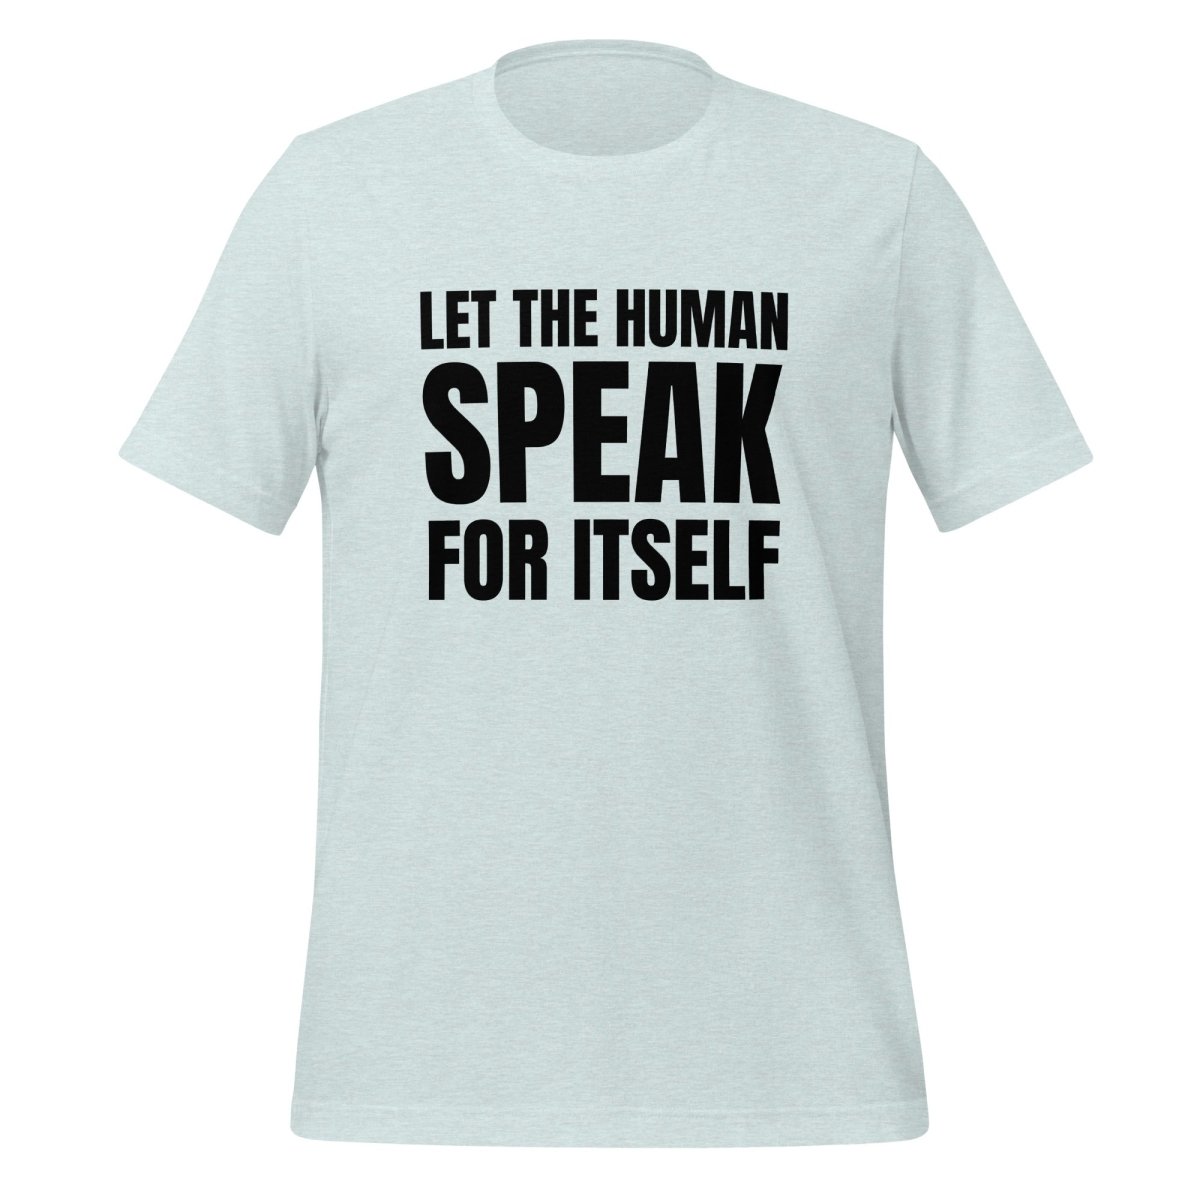 Let the Human Speak for Itself T - Shirt (unisex) - Heather Prism Ice Blue - AI Store